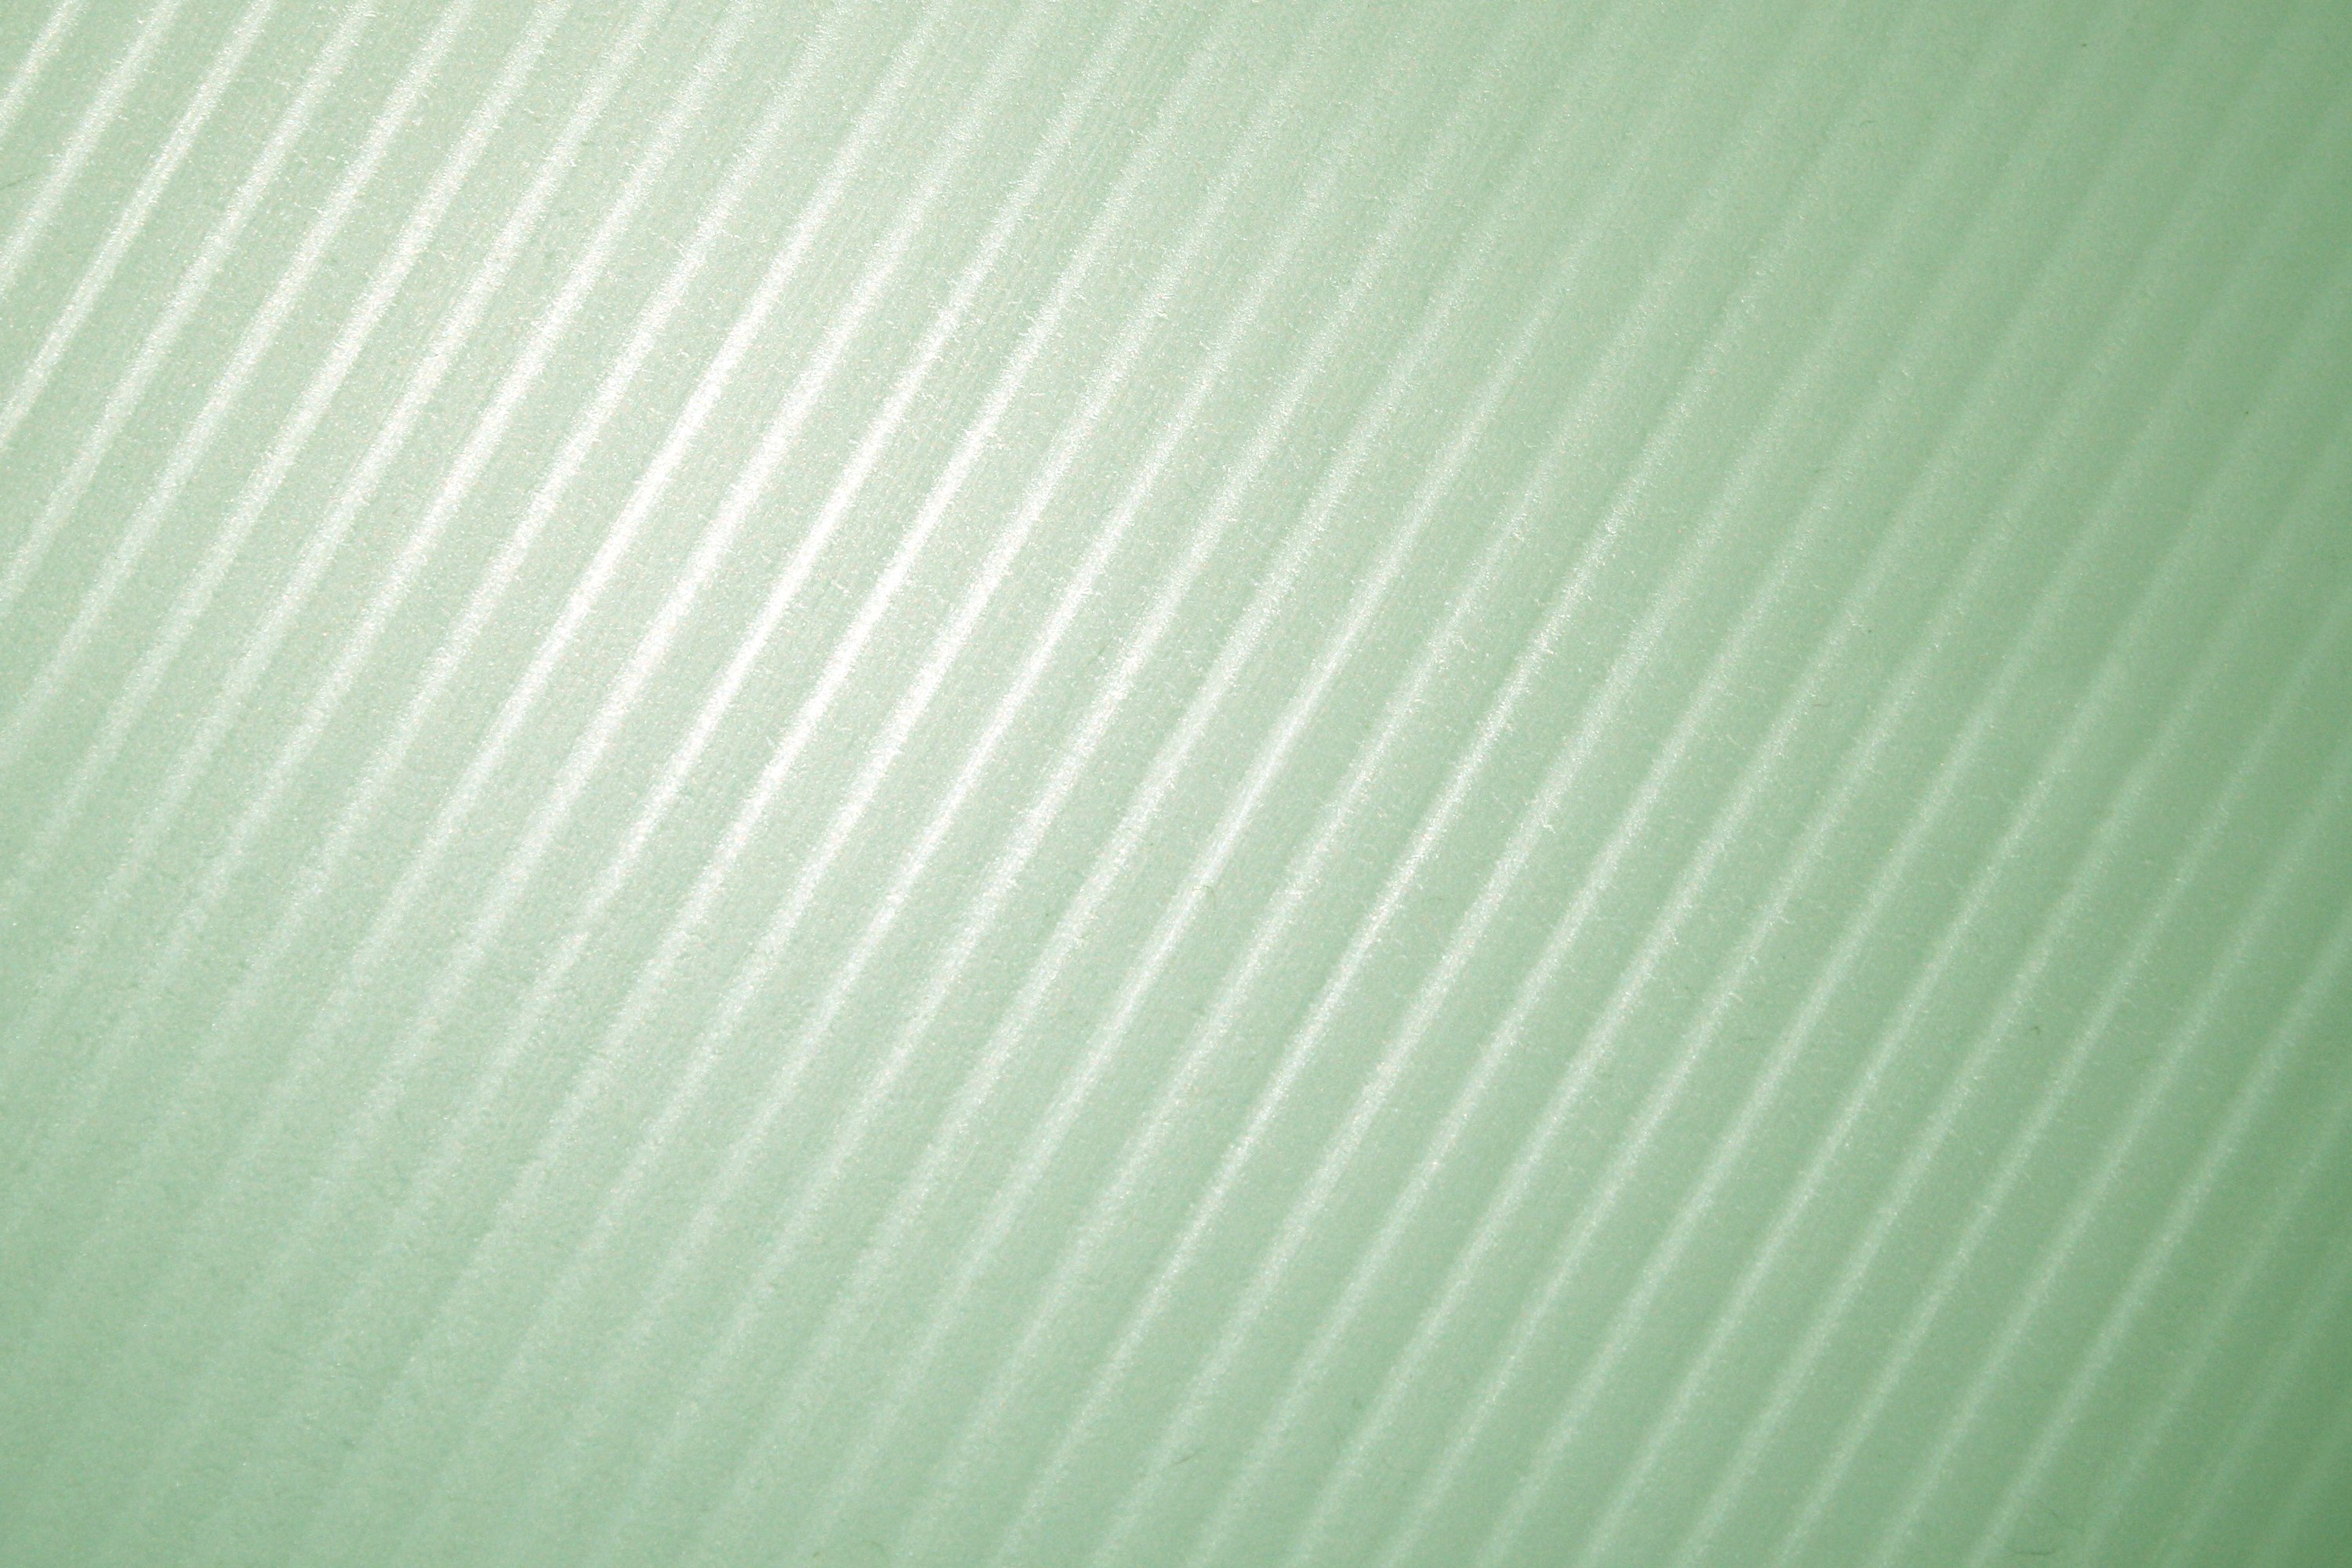 Sage Green Diagonal Striped Plastic Texture Picture Free Photograph